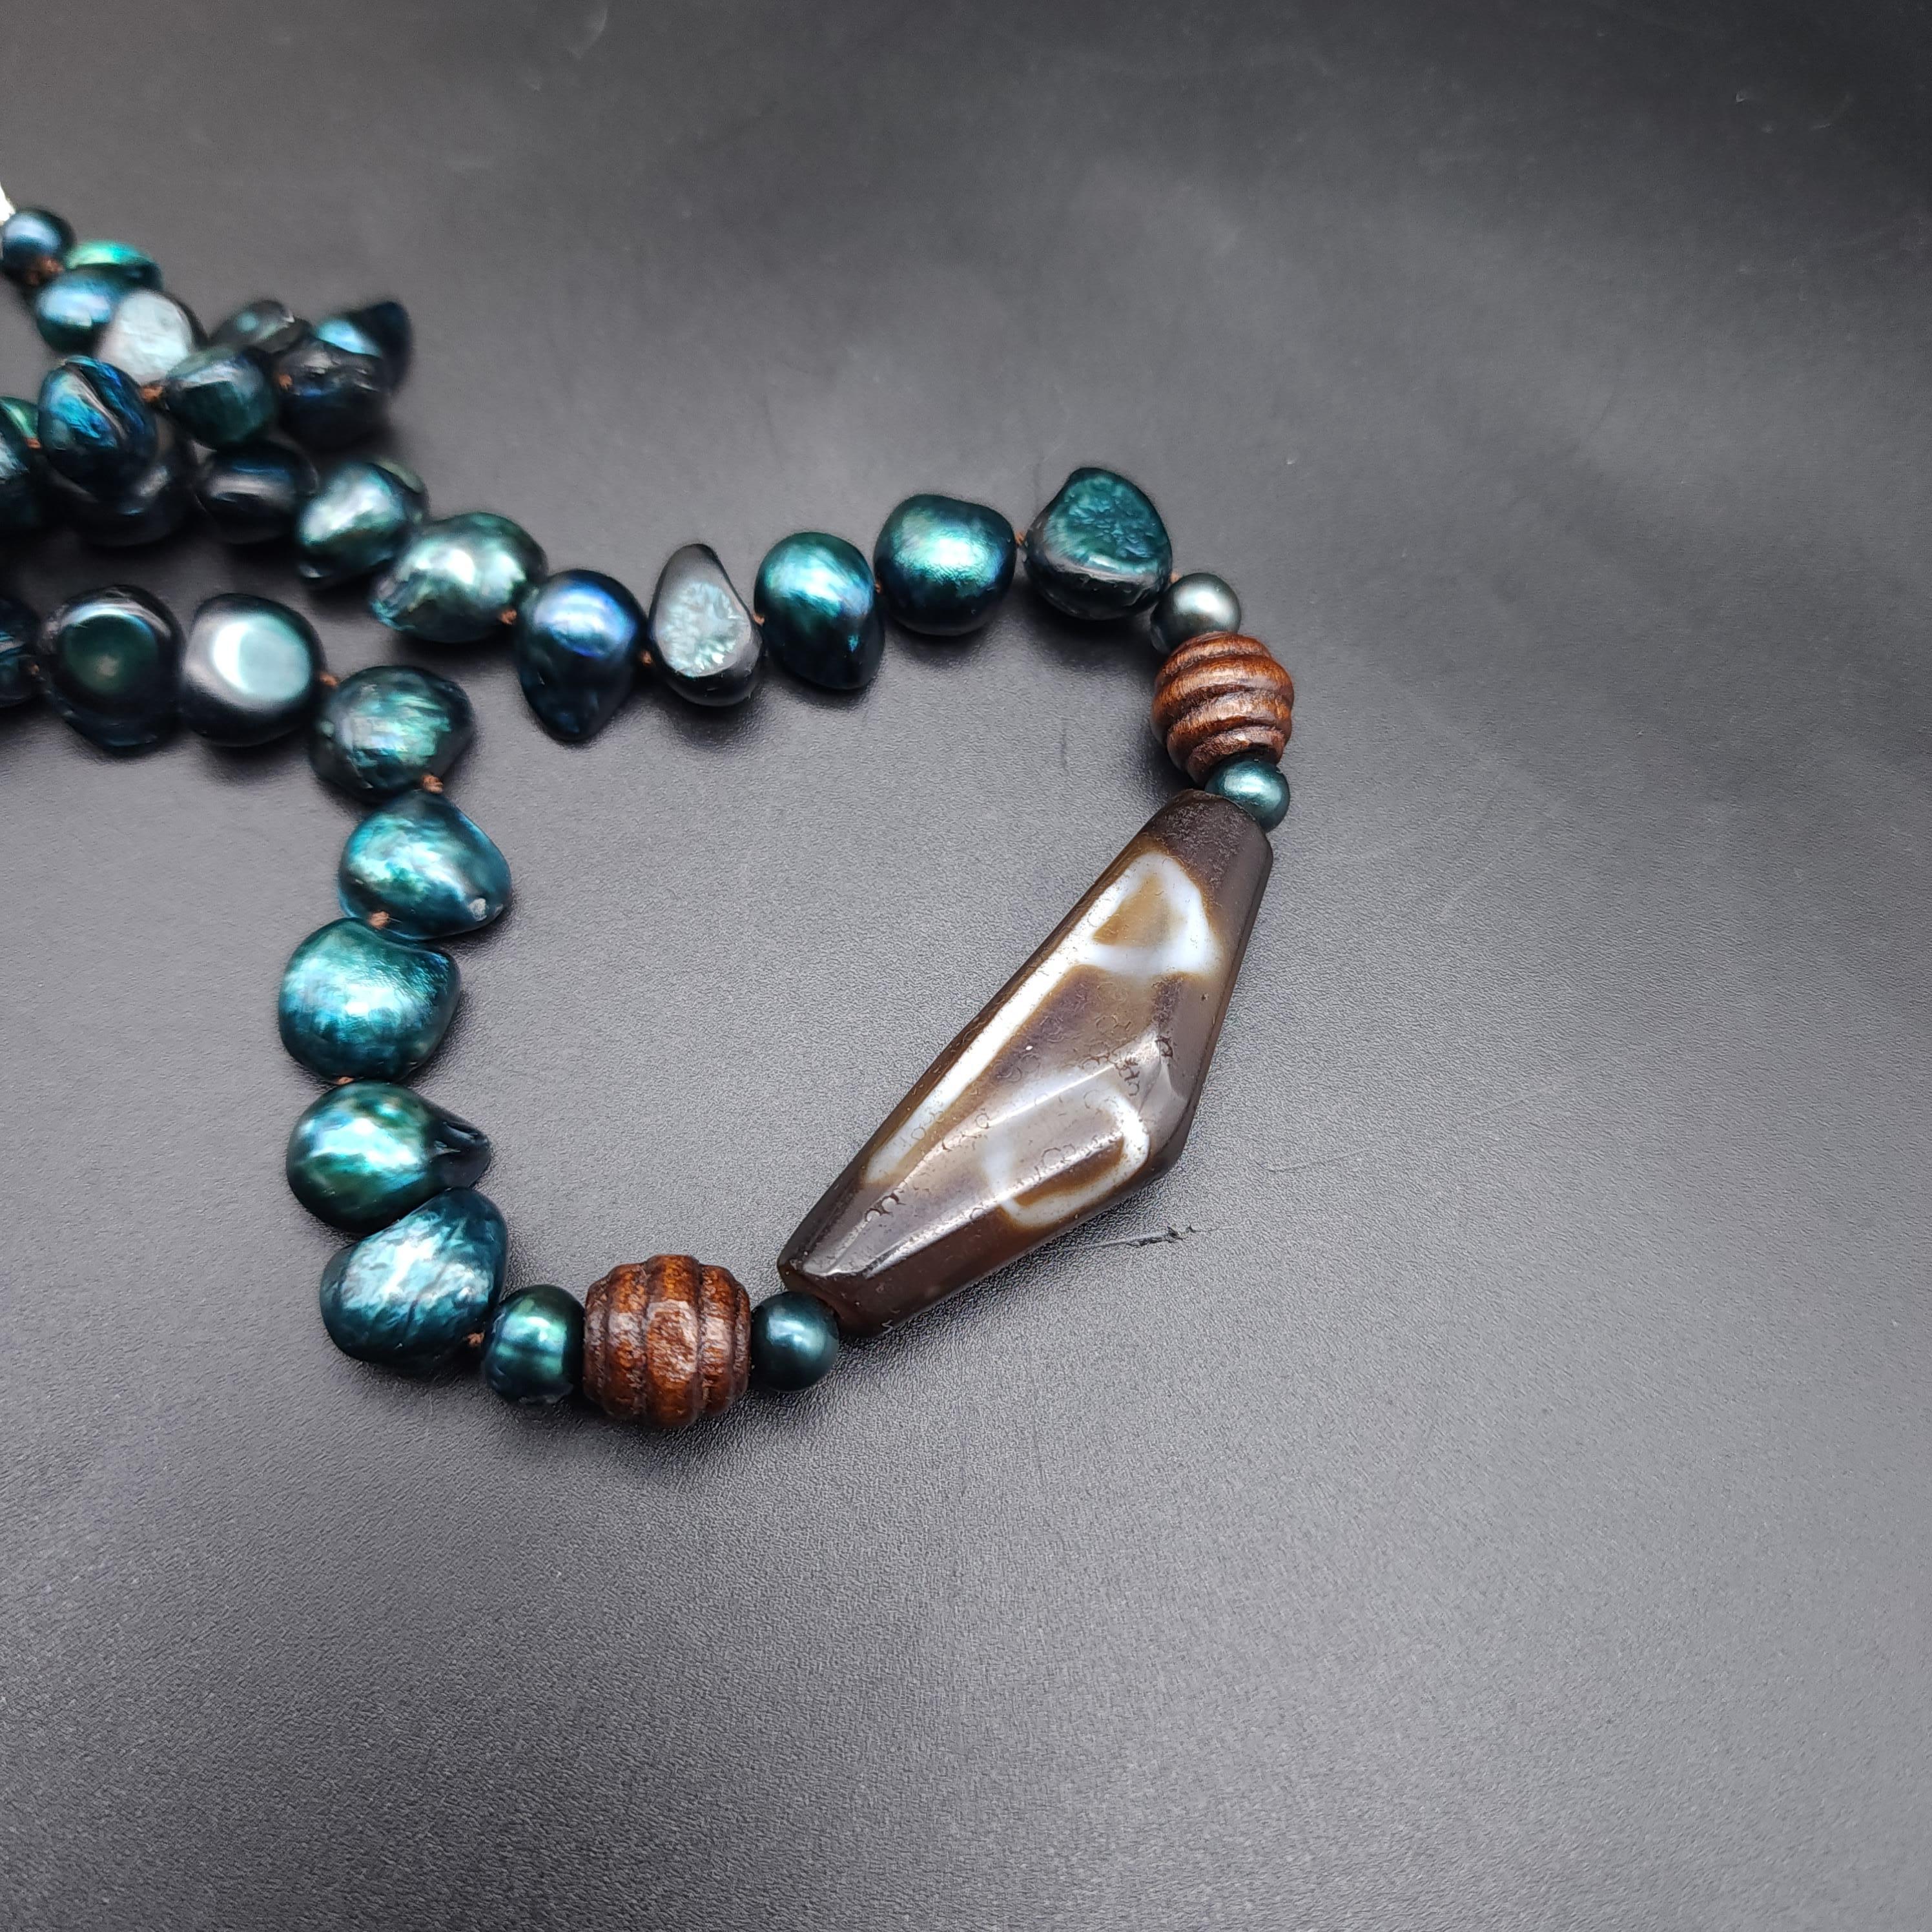 Vintage Dzi Pendant, Freshwater Blue Green Pearl Bead Necklace, Sterling Silver In Excellent Condition For Sale In Milford, DE